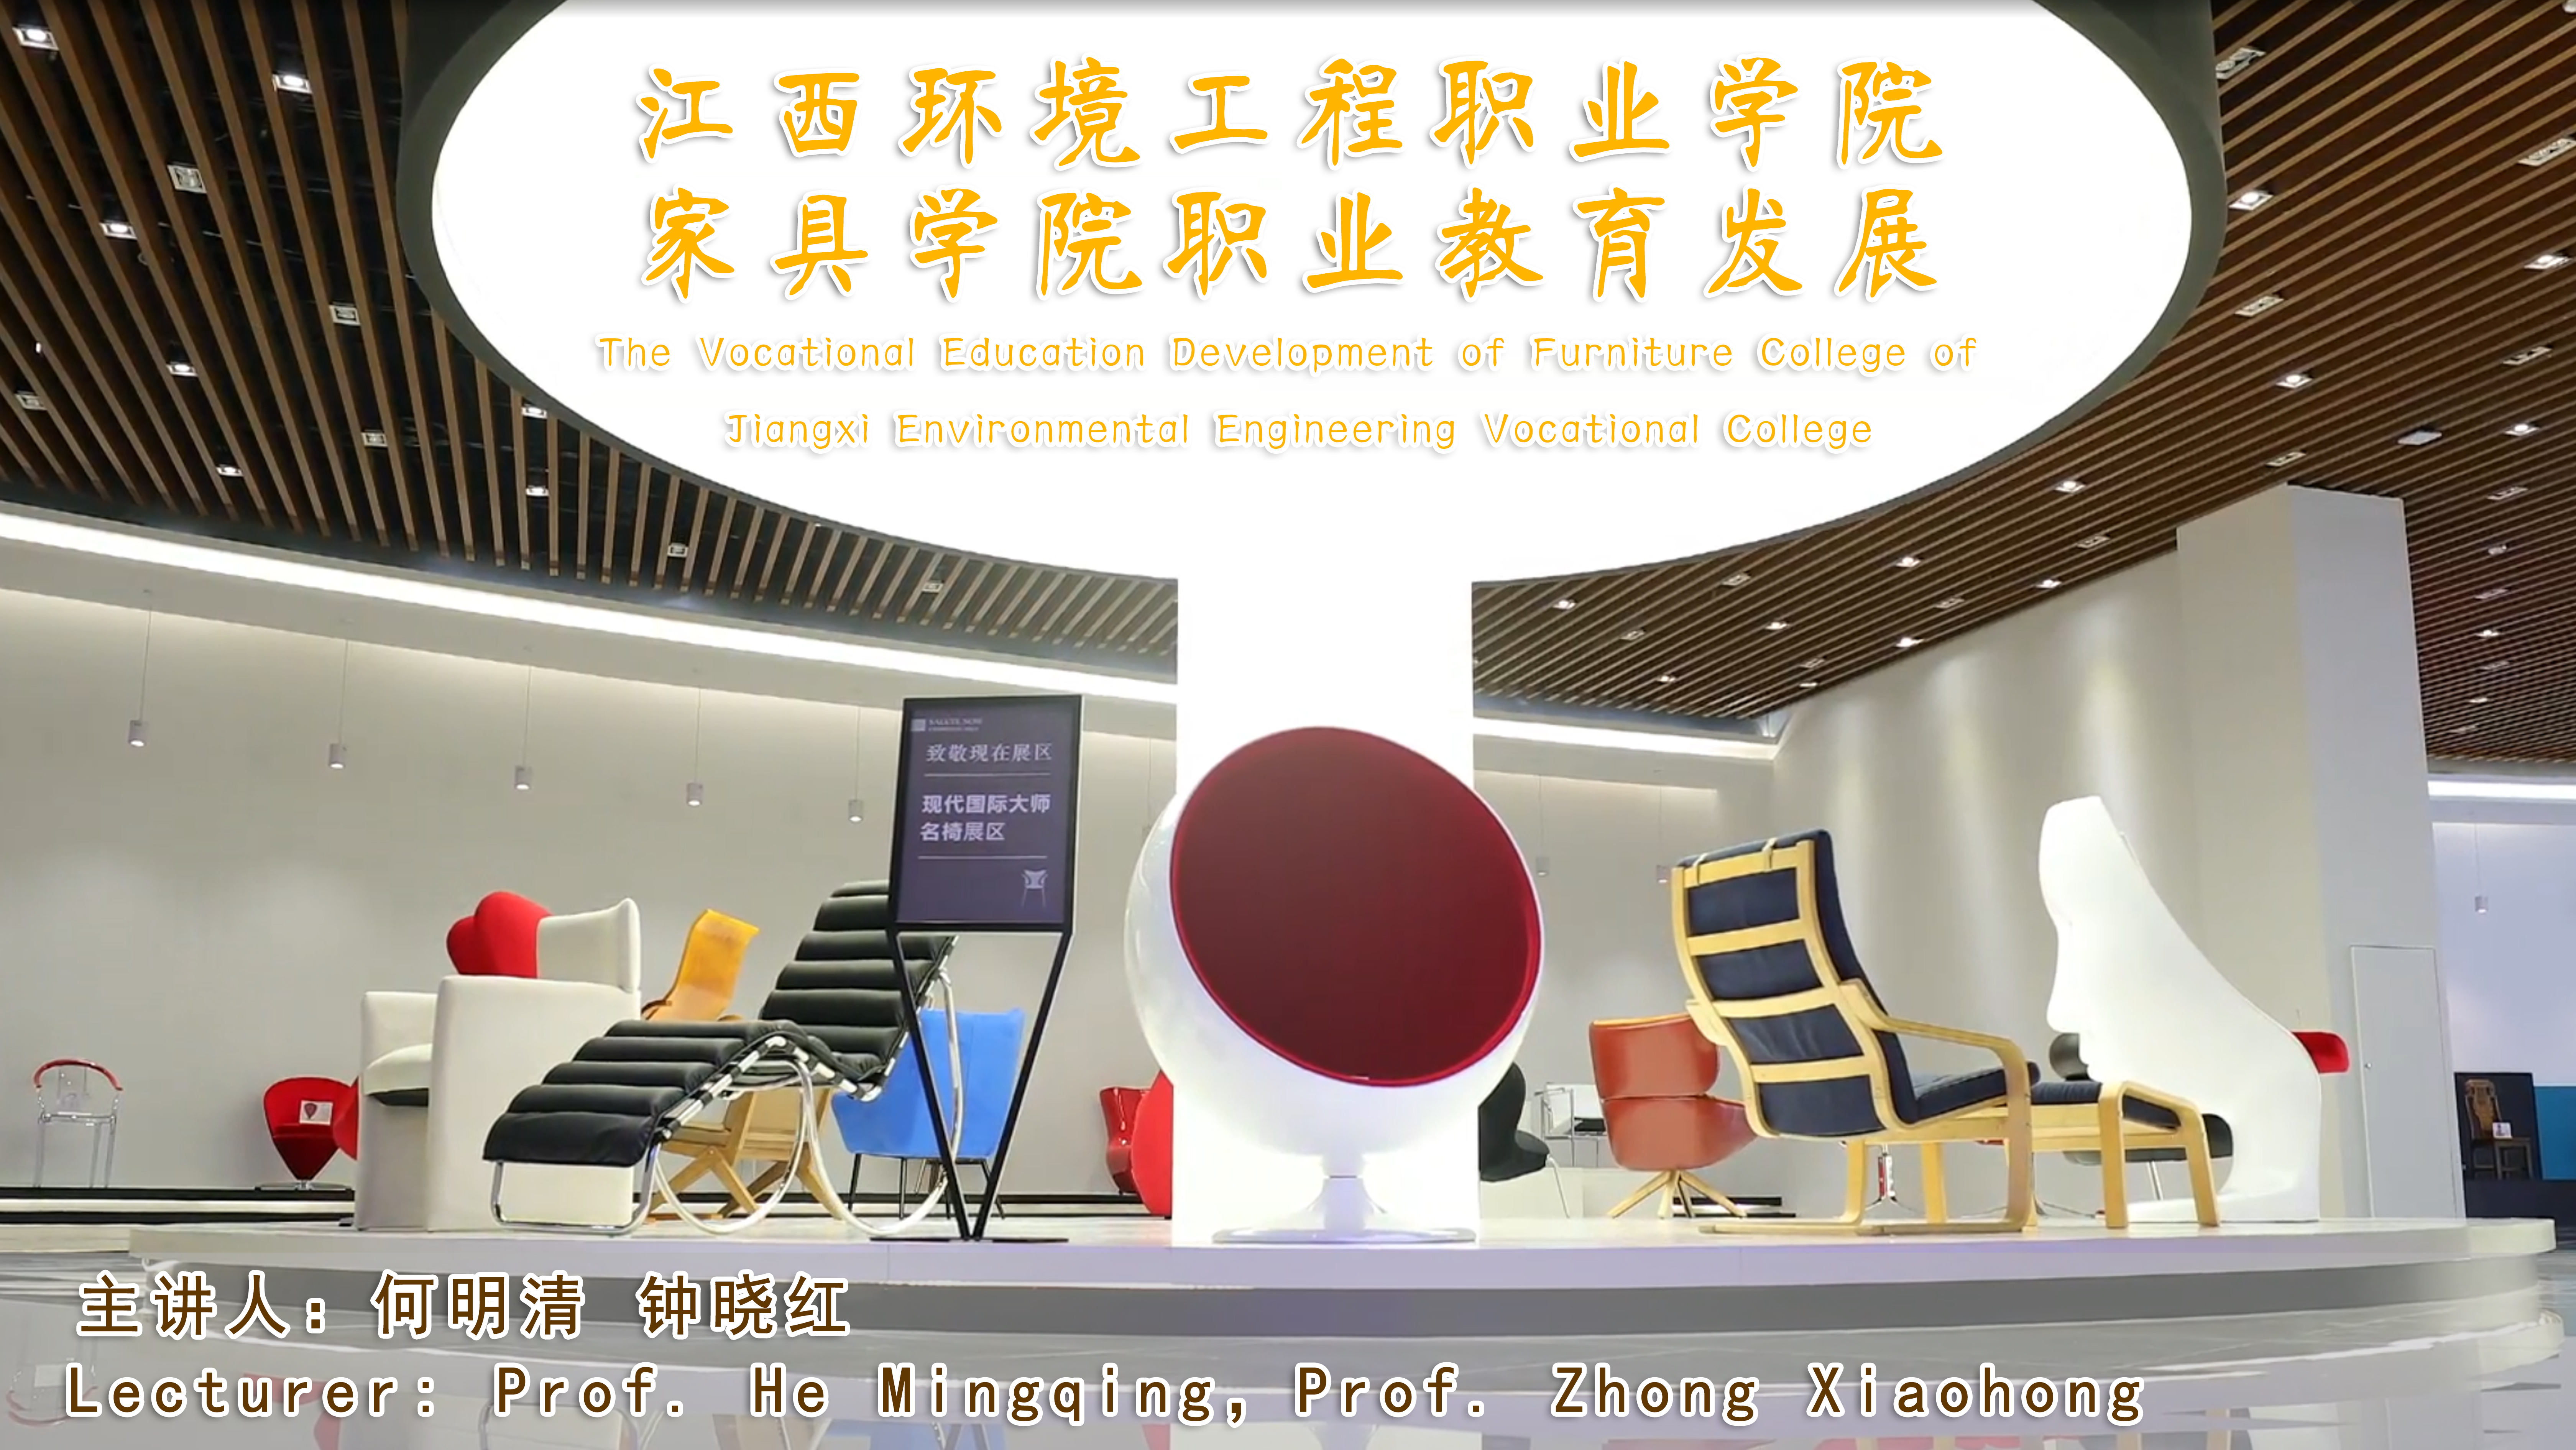 The Vocational Education Development of Furniture College of Jiangxi Environmental Engineering Vocational College